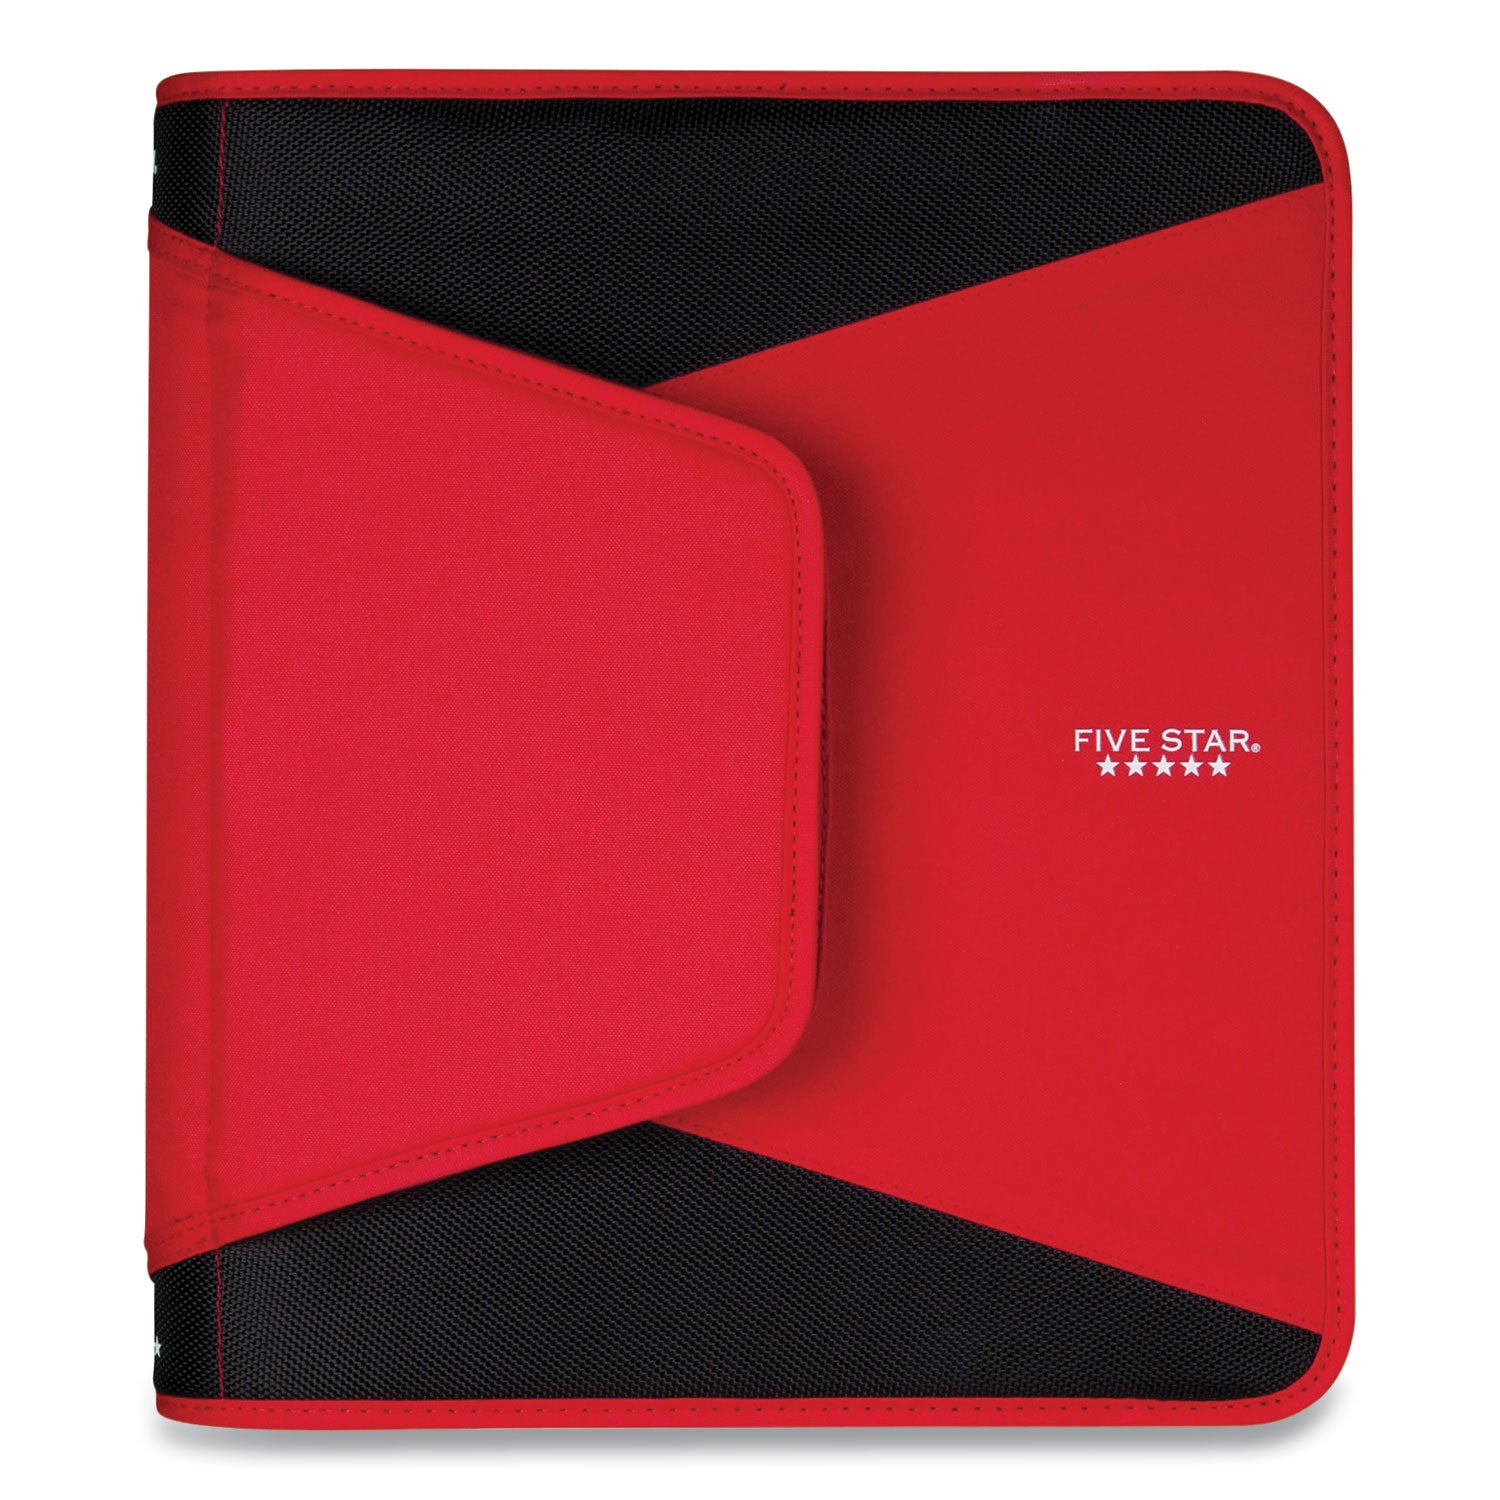 tech-zipper-binder-3-rings-15-capacity-11-x-85-red-black-accents_acc72206 - 1